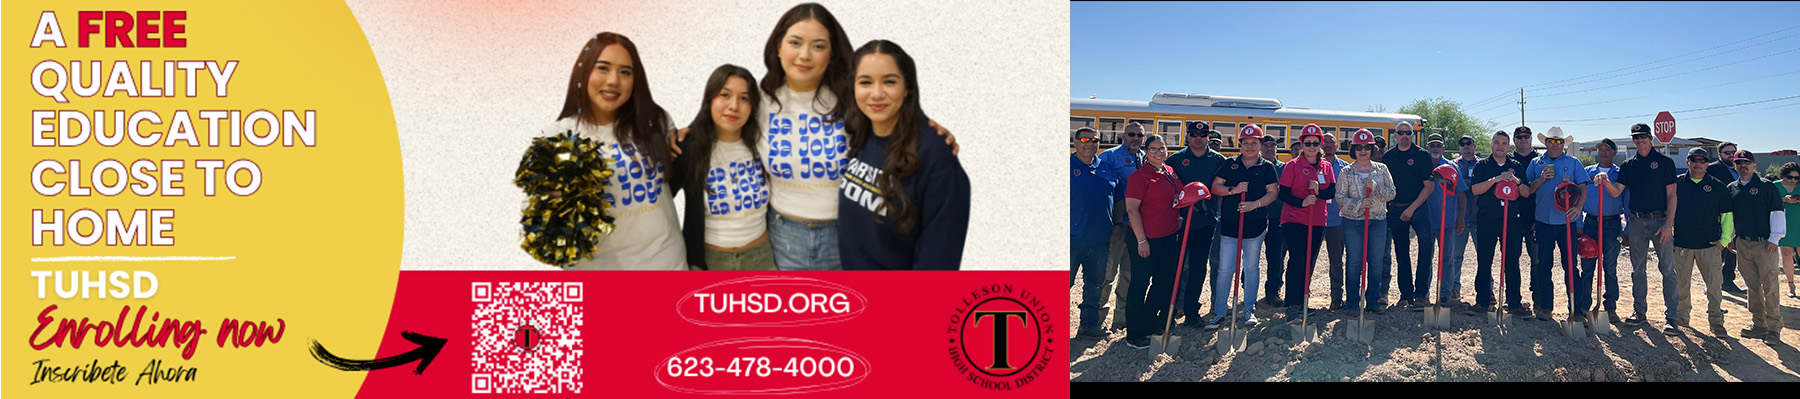 A free quality education close to home - TUHSD Enrolling now | Inscribete Ahora - tuhsd.org - 623-478-4000| Group of TUHSD representatives outside with shovels